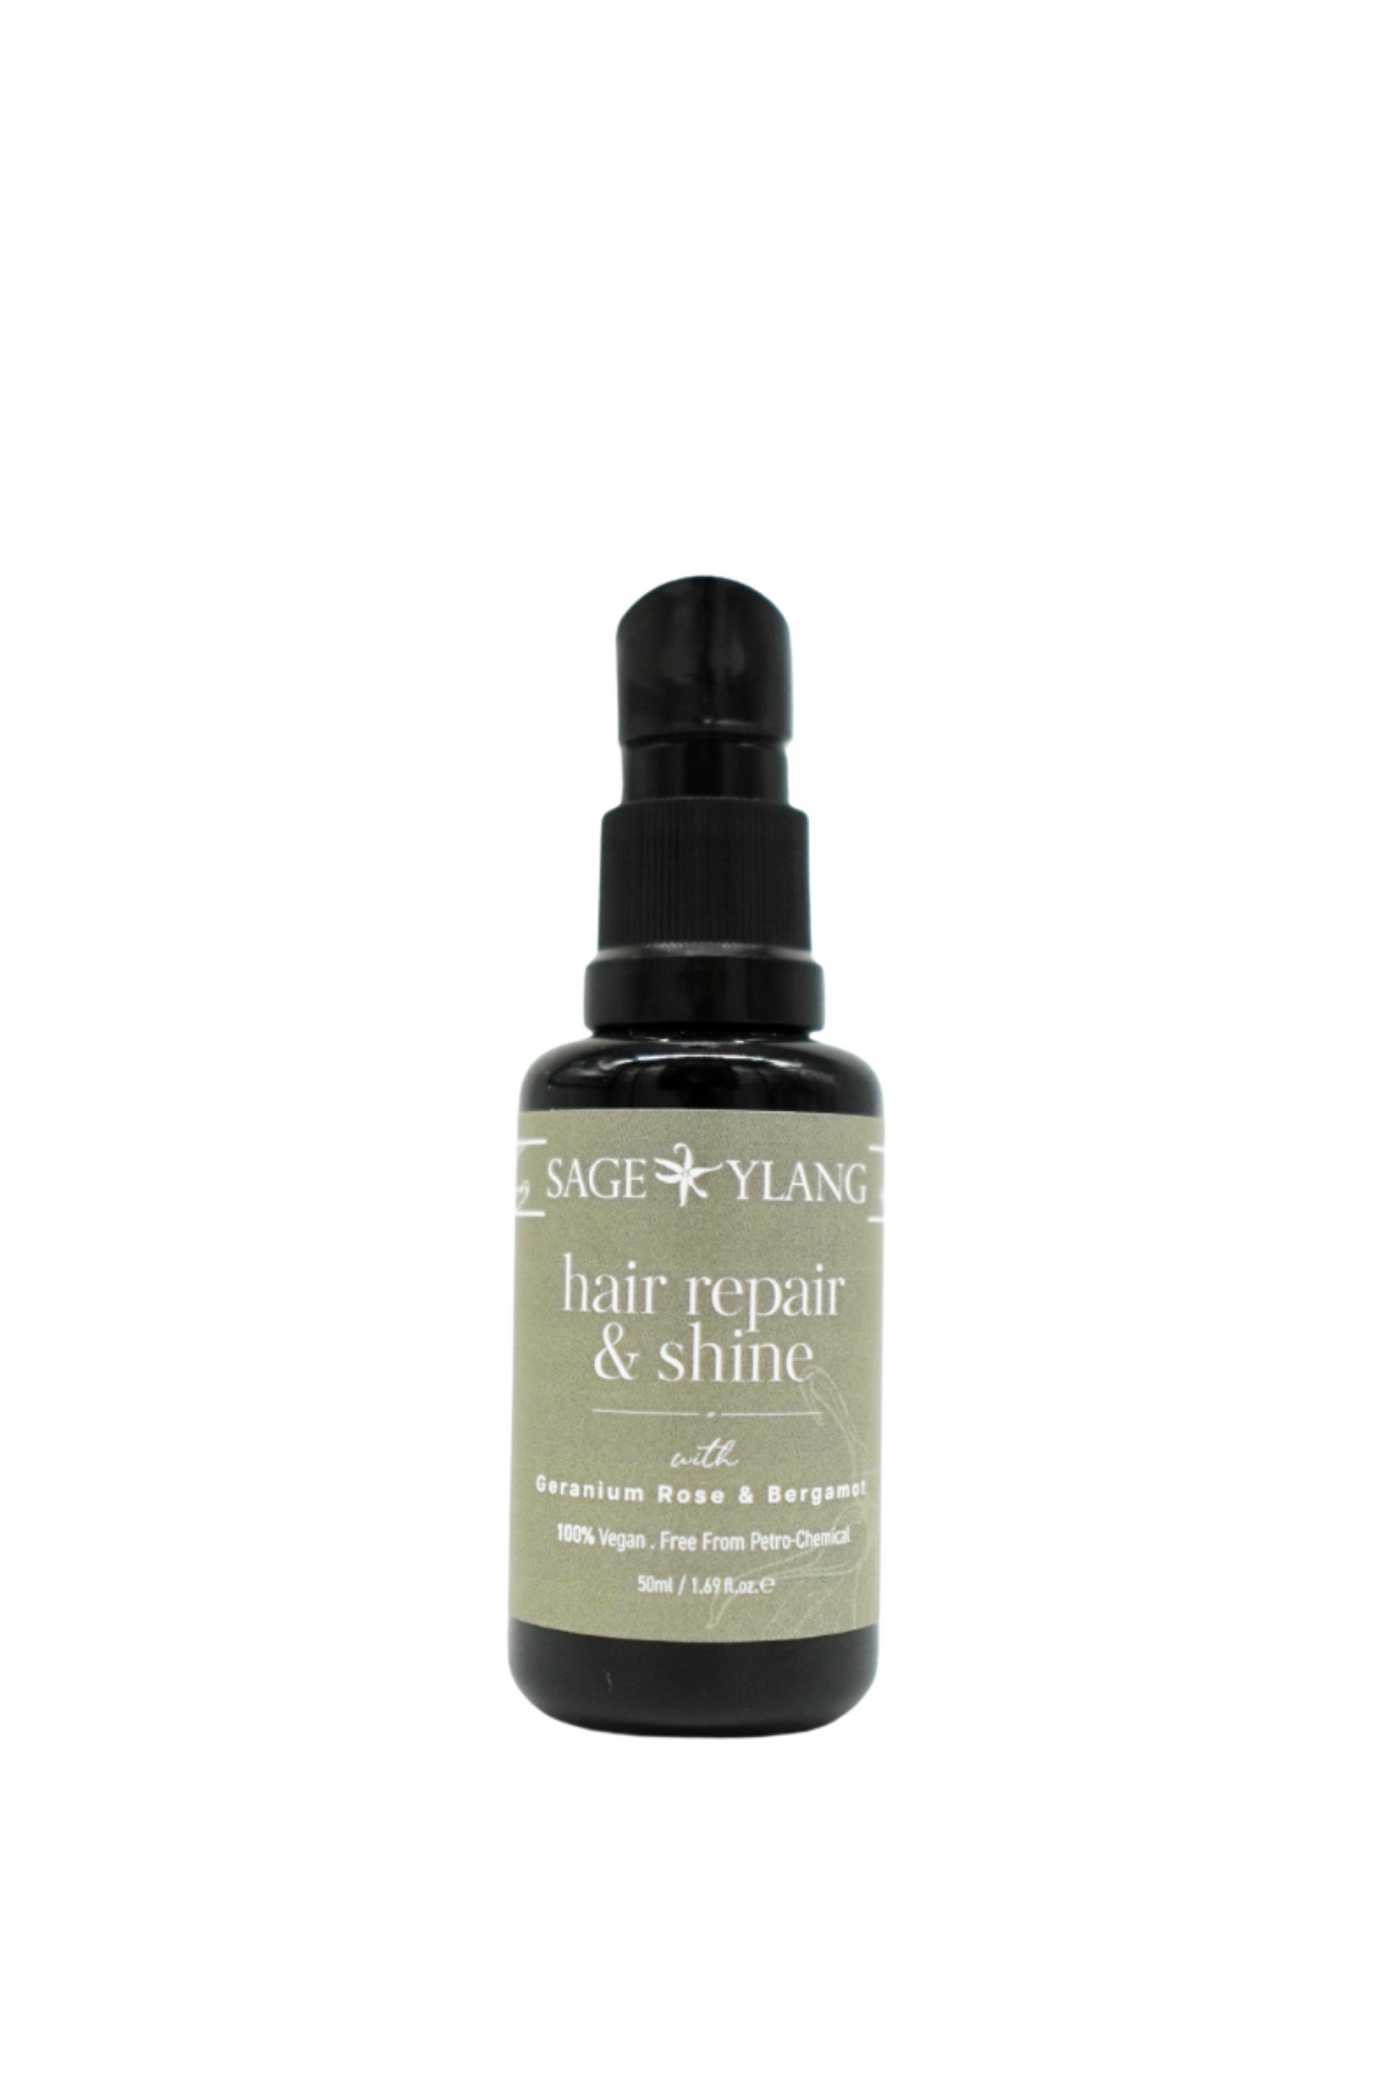 Sage & Ylang Hair Repair and Shine Serum, available on ZERRIN with free Singapore shipping above $50